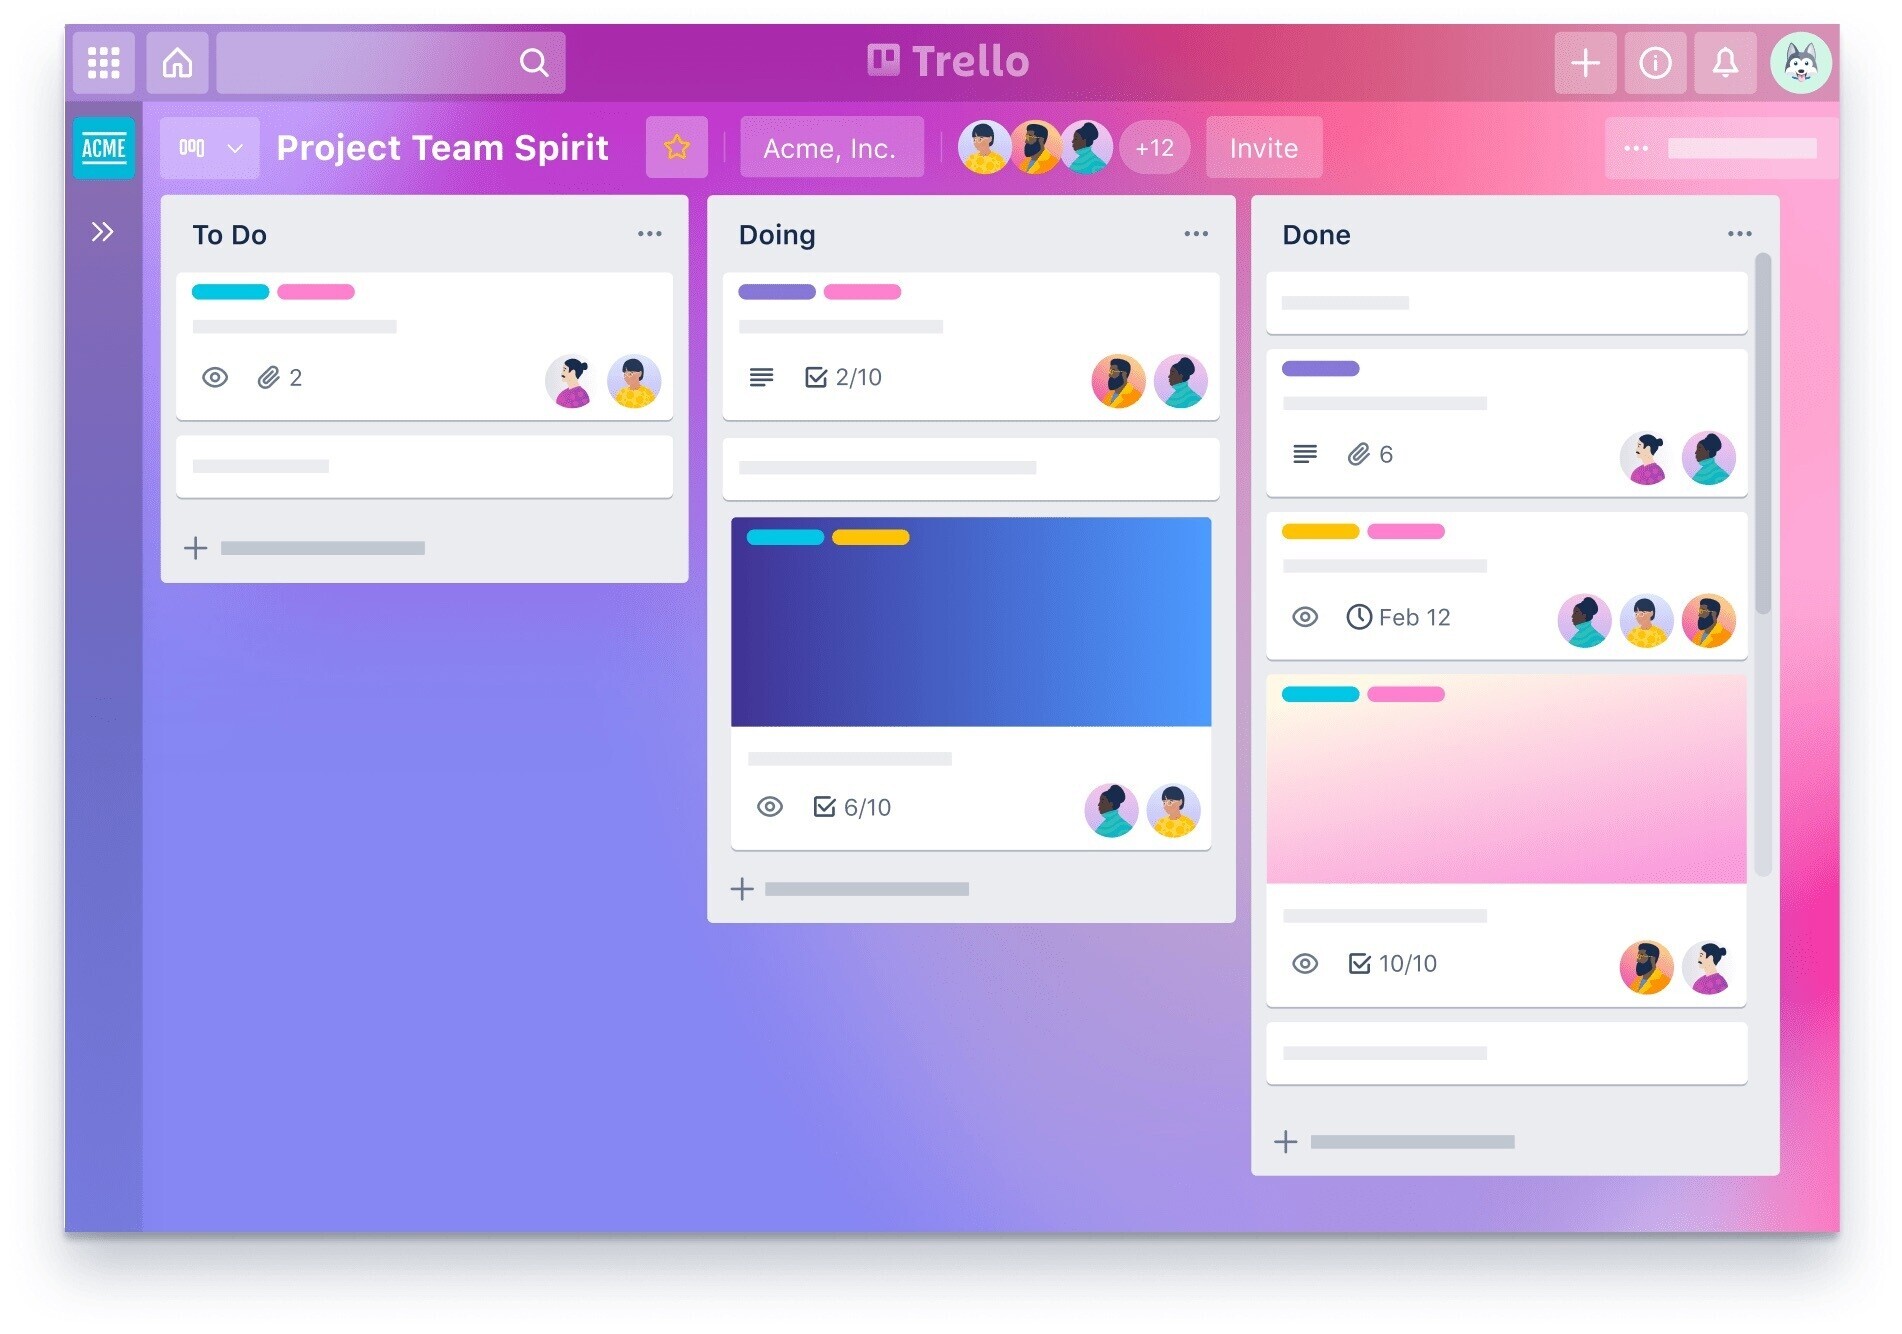 Trello digital kanban boards organize project workflows into to-do, doing, and done stages